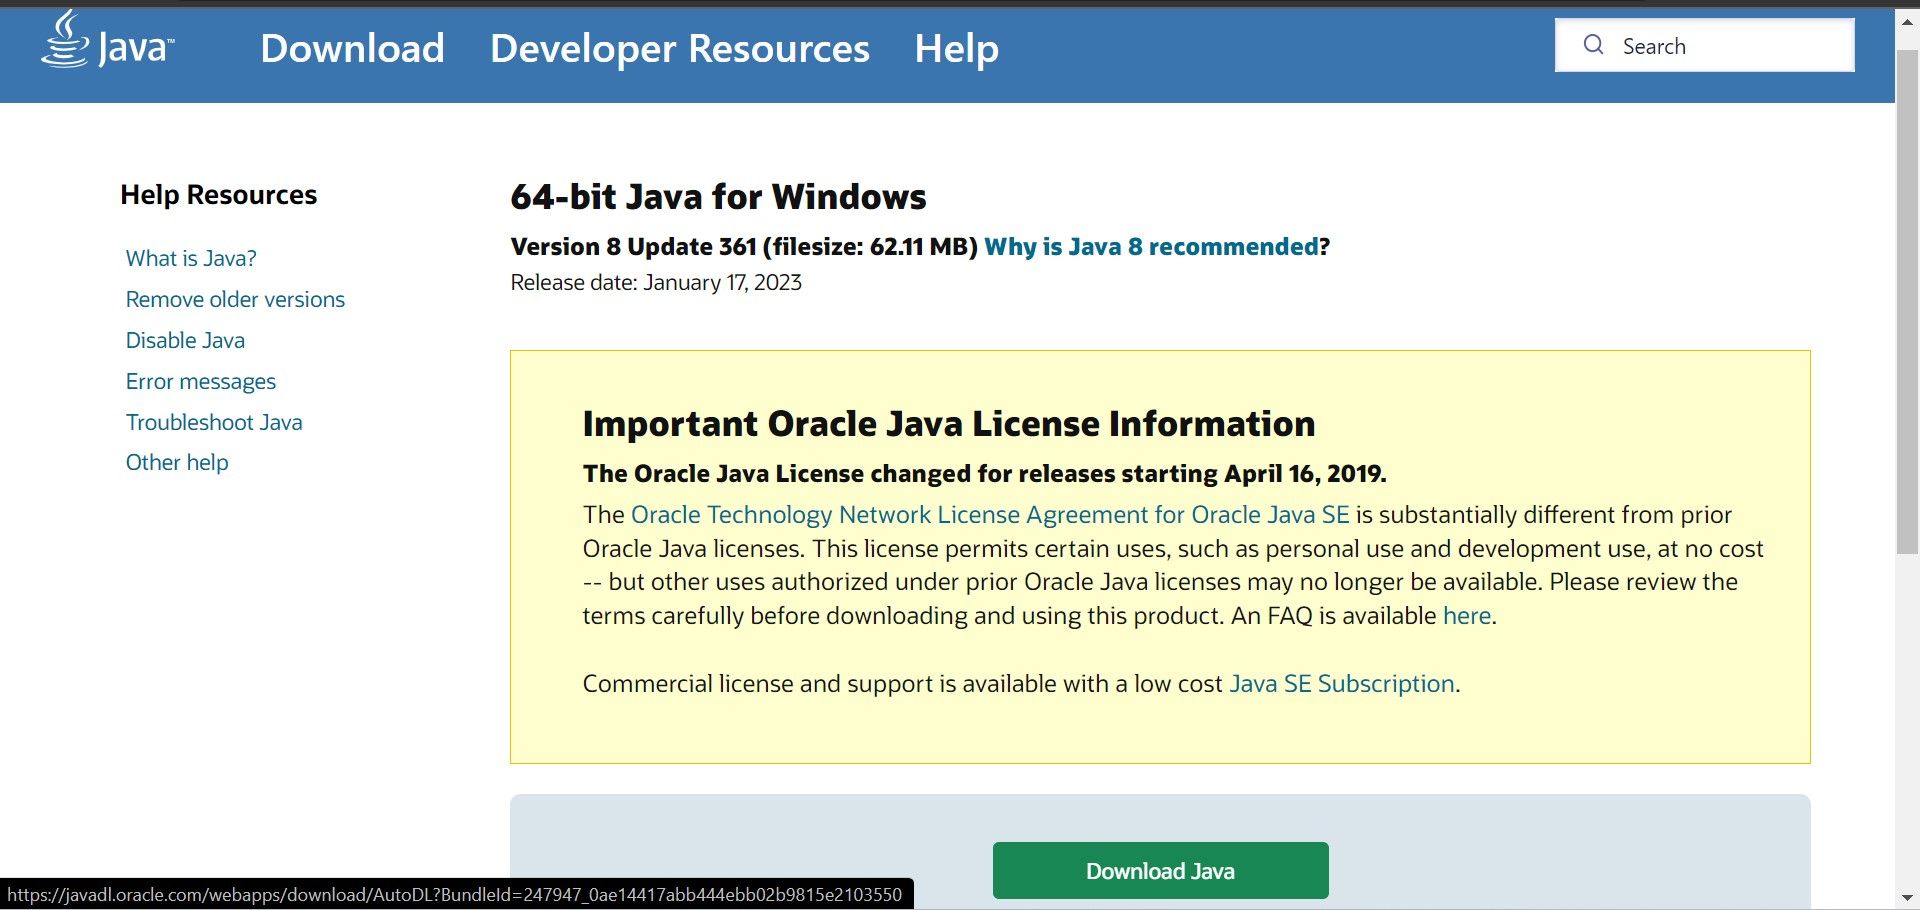 Download Java Runtime Environment From the Java Website